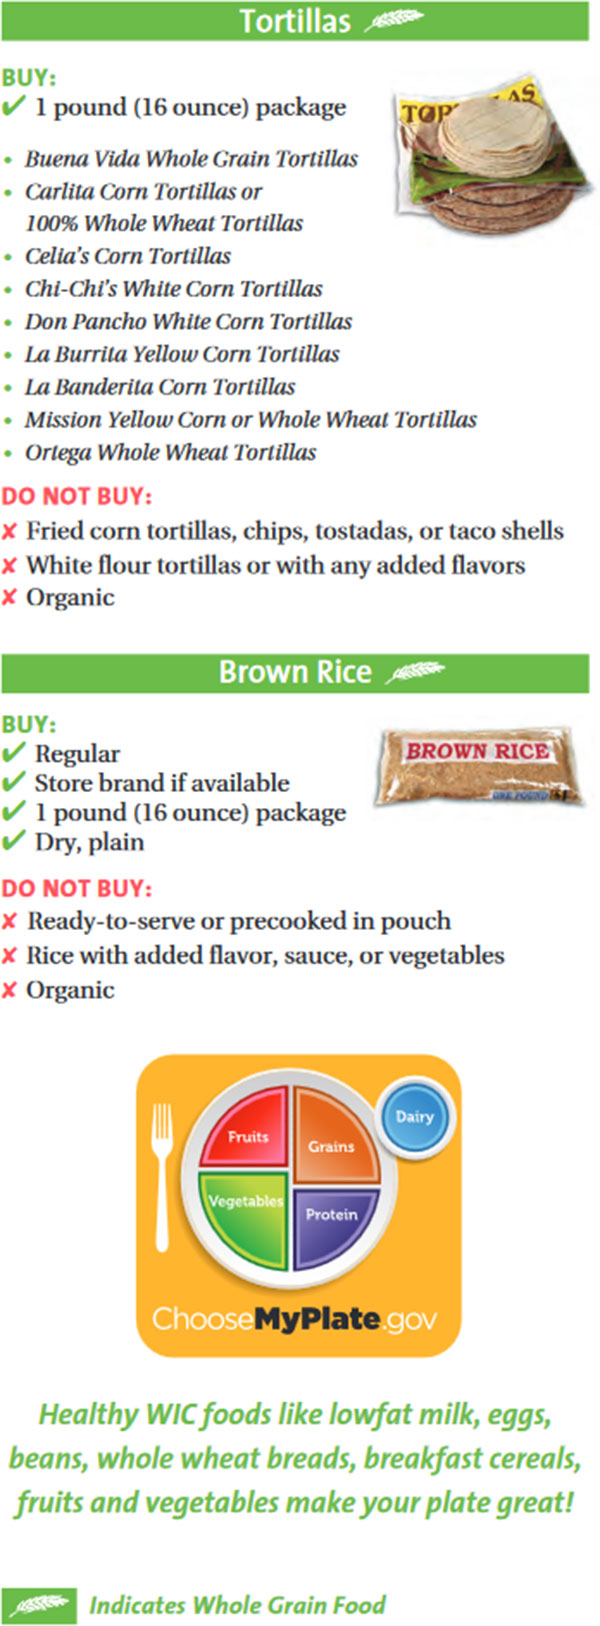 Maryland WIC Food List Tortillas and Brown Rice